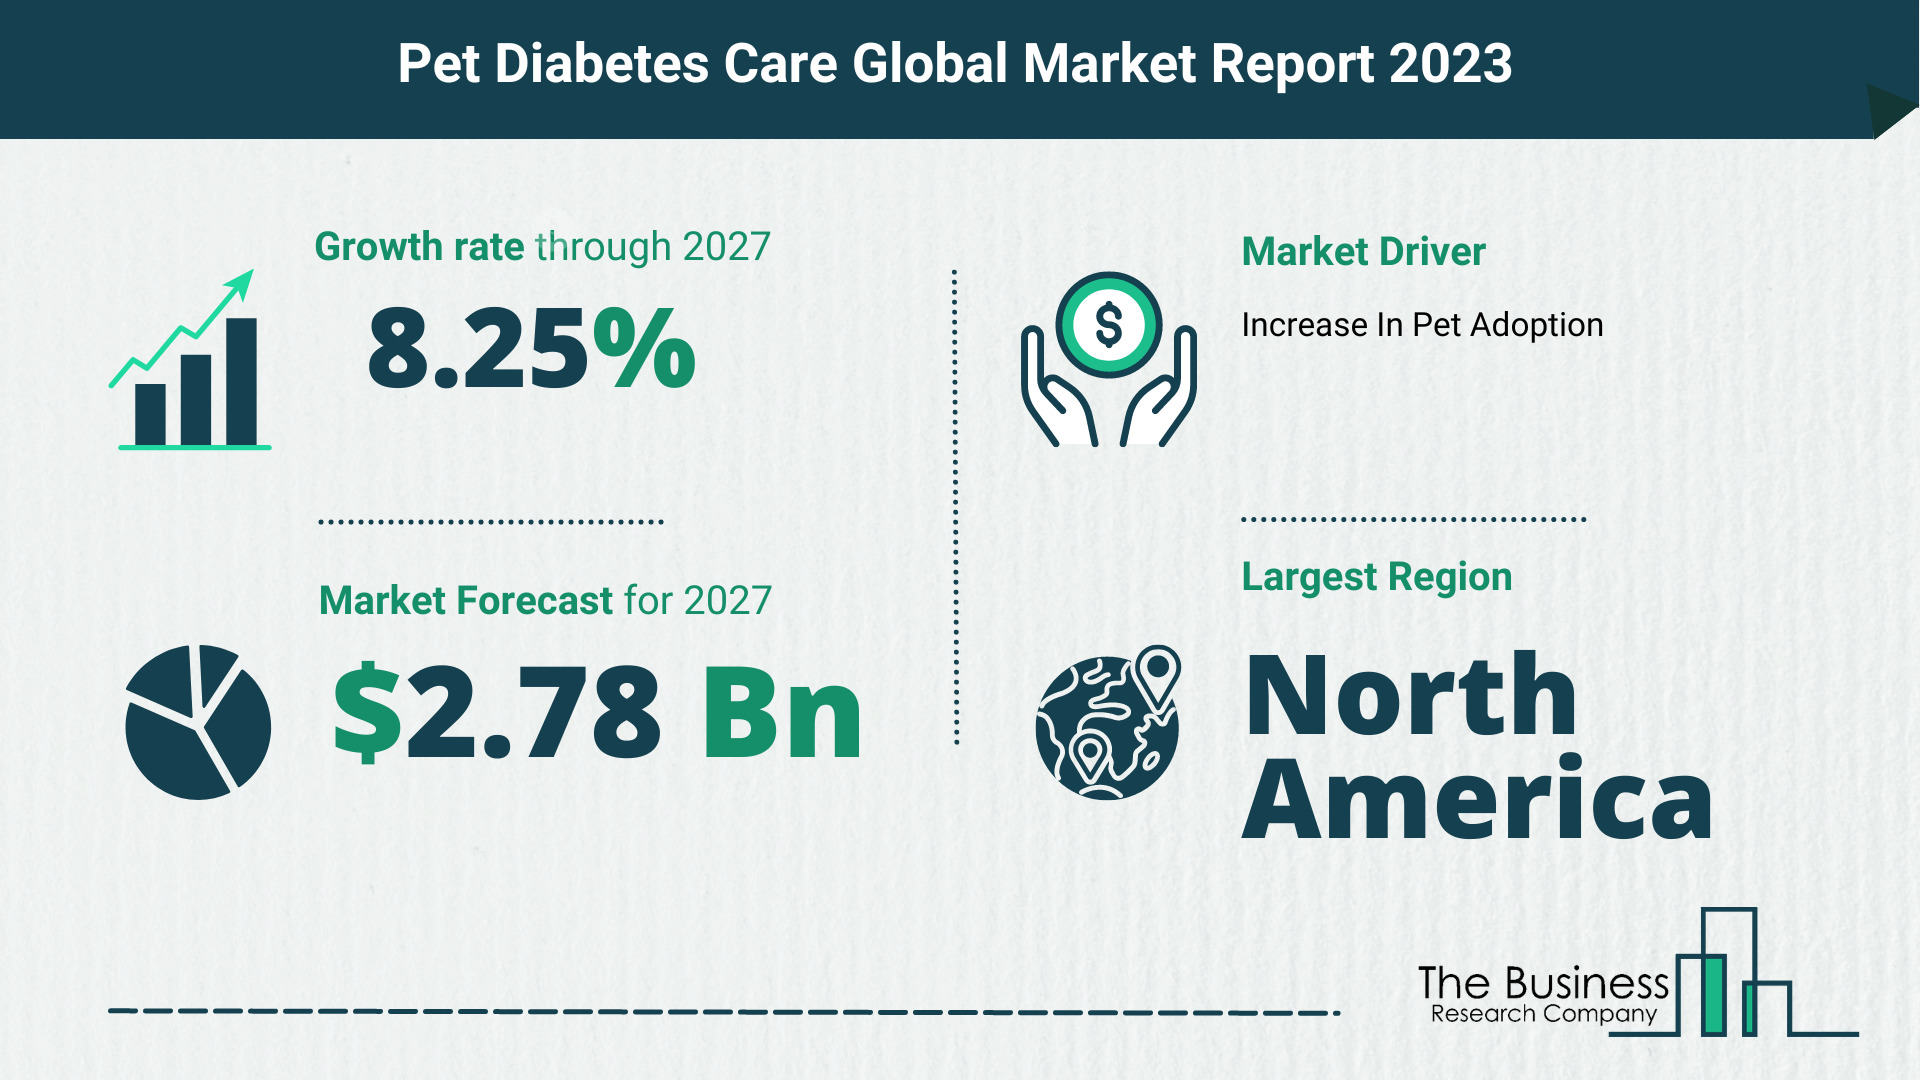 Global Pet Diabetes Care Market Opportunities And Strategies 2023